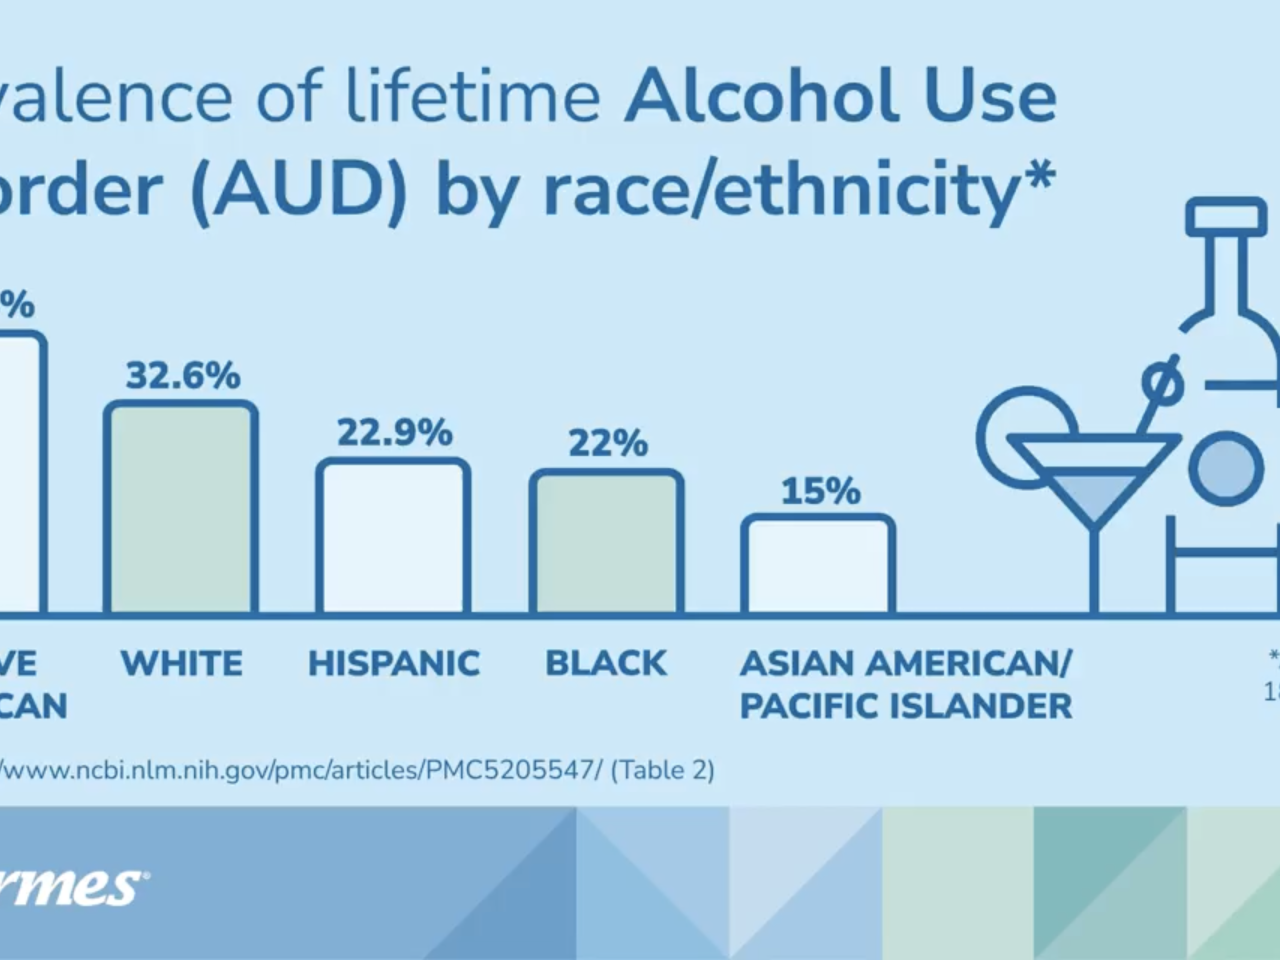 Bar chat of Prevalence of lifetime Alcohol Use Disorder (AUD) by race/ethnicity